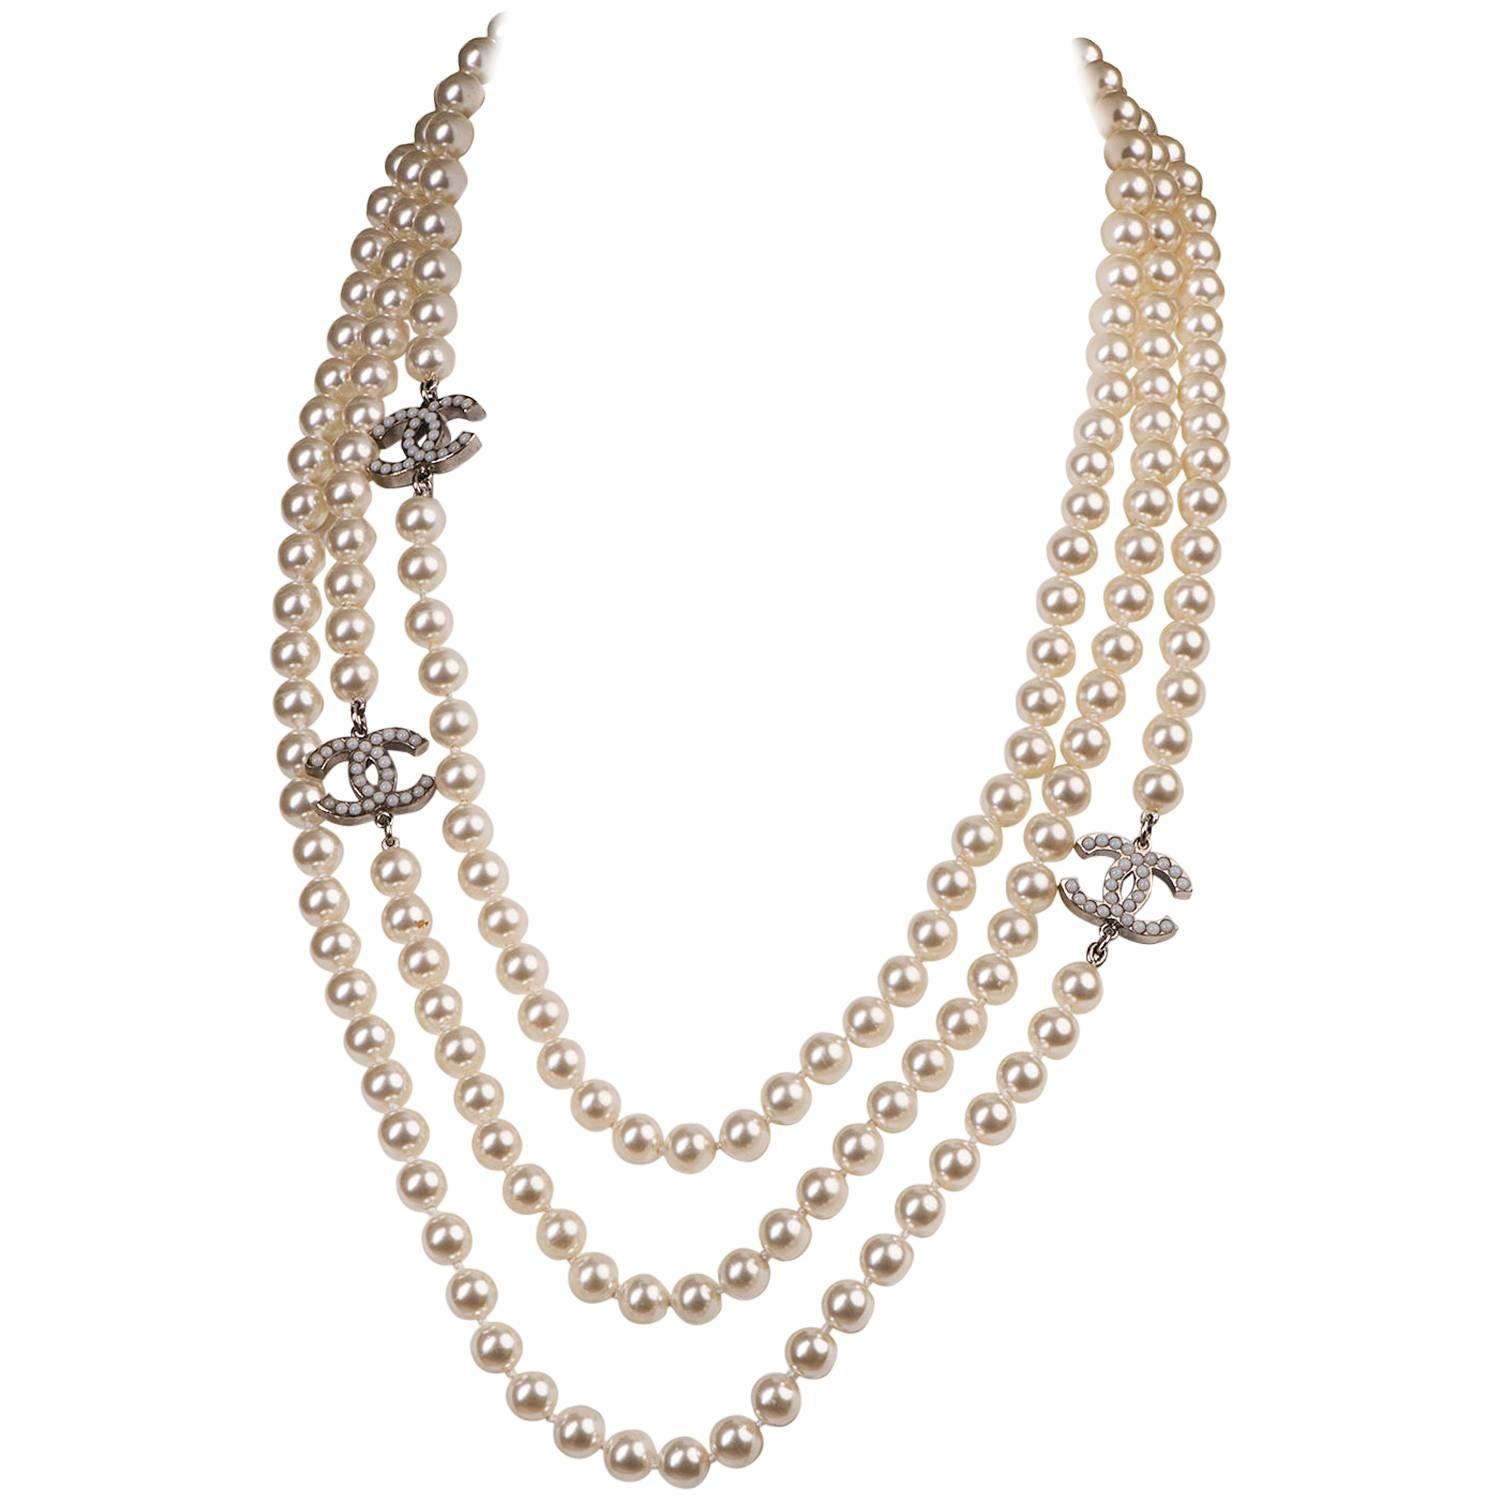 WOW Chanel 3-String Pearl Sautoir with 3-Inset Interlocking 'C's in Faux Pearl